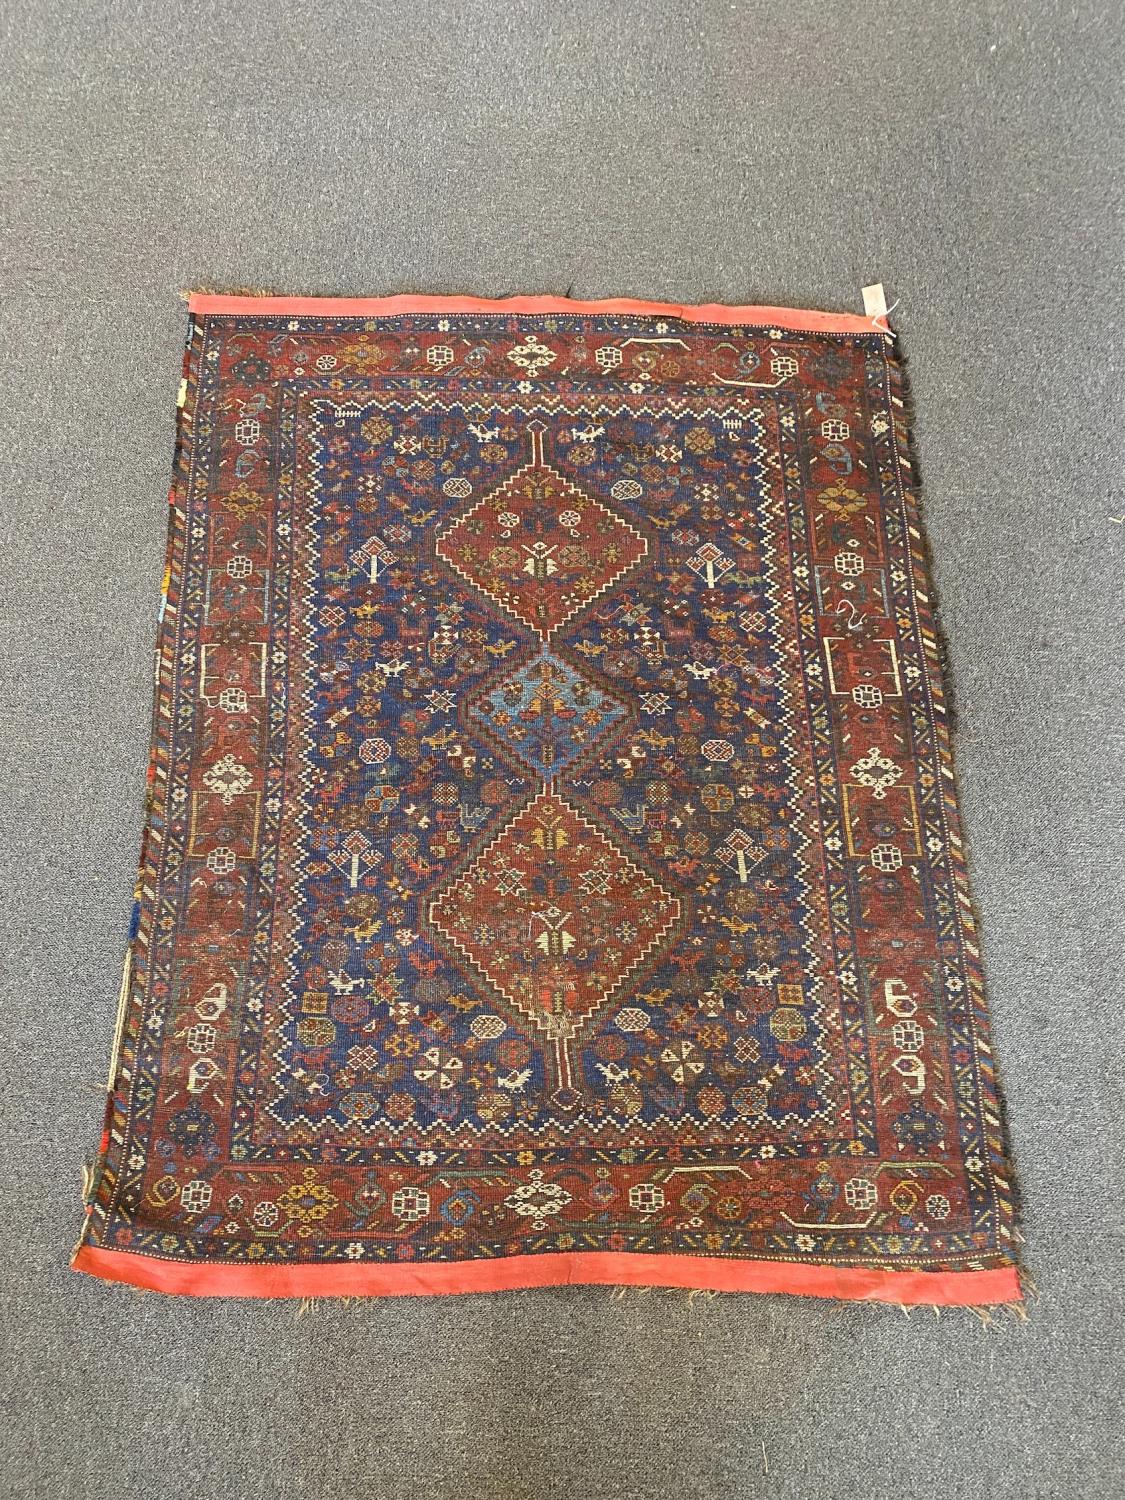 A Shiraz blue ground rug with triple lozenge medallion and floral border 160 x 122 cms. - Image 4 of 4